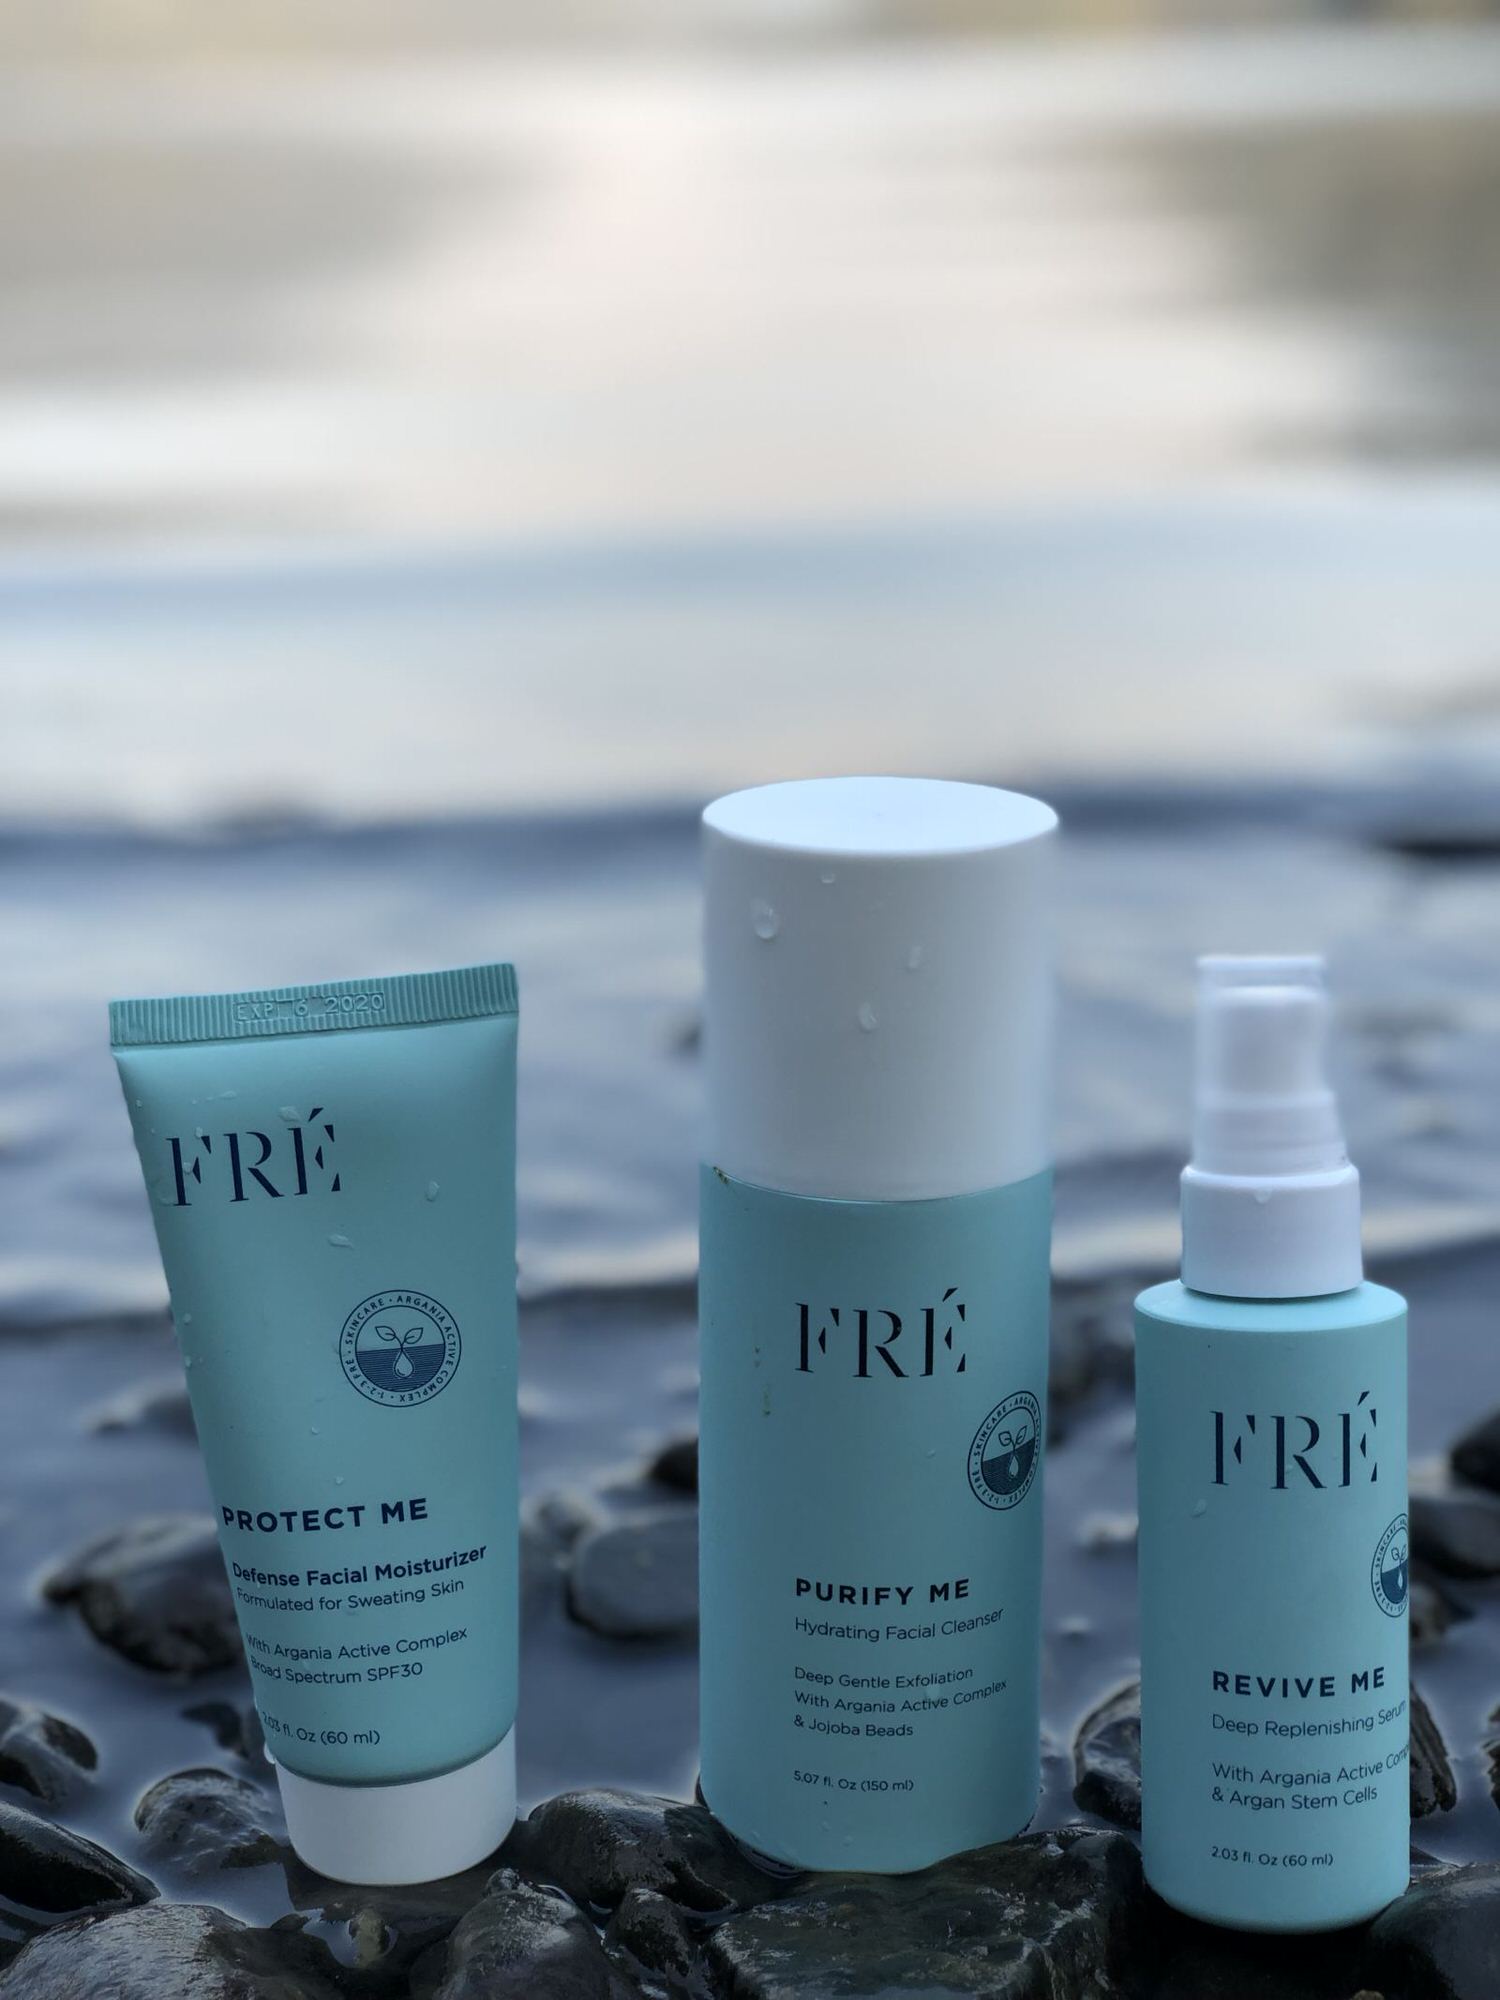 Fre skincare review 